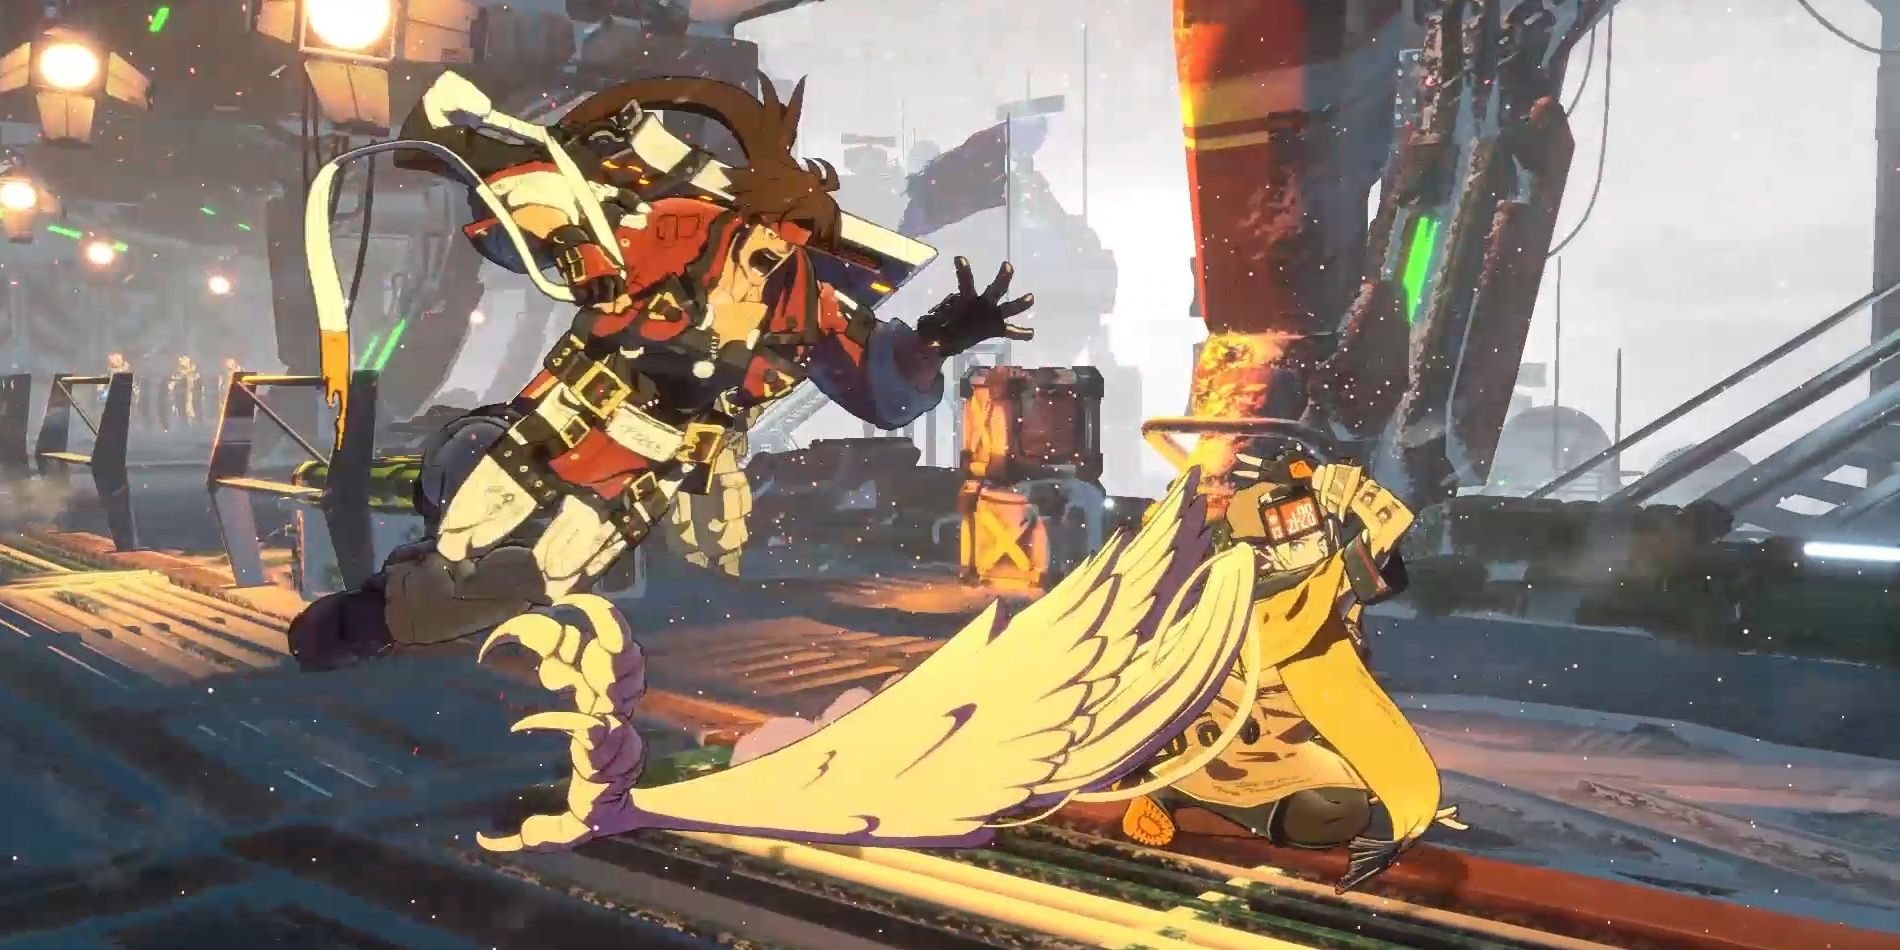 Millia Rage using her hair as a beast's talon to attack her opponent in Guilty Gear -Strive-